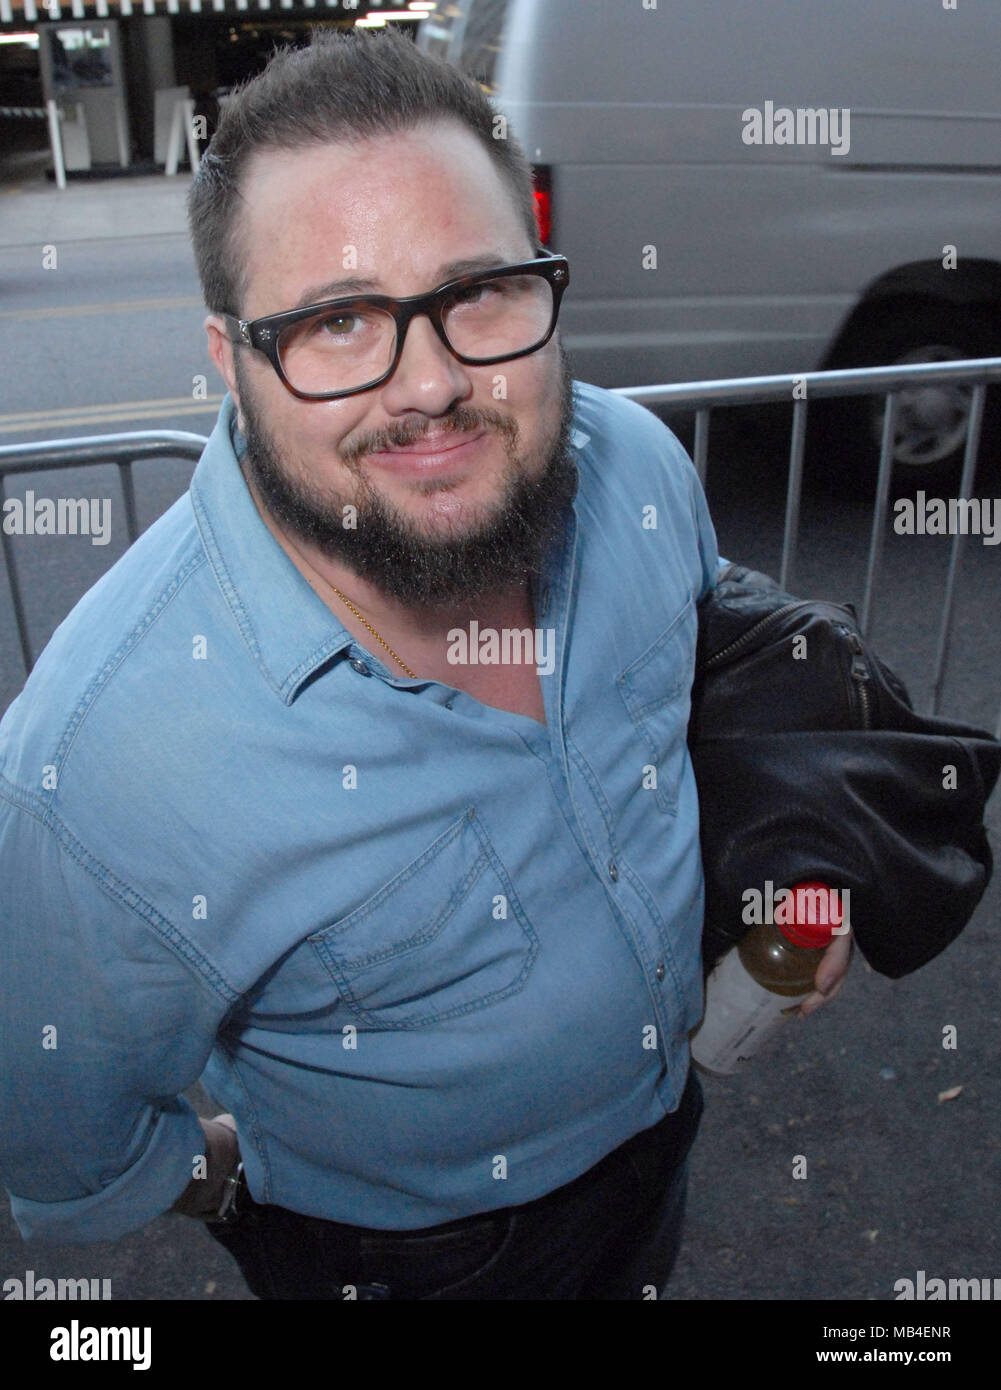 BEVERLY HILLS, CA - APRIL 06: Actor Chaz Bono attends For Your  Consideration Red Carpet event for 'American Horror Story: Cult' at WGA  Theater on April 6, 2018 in Beverly Hills, California.